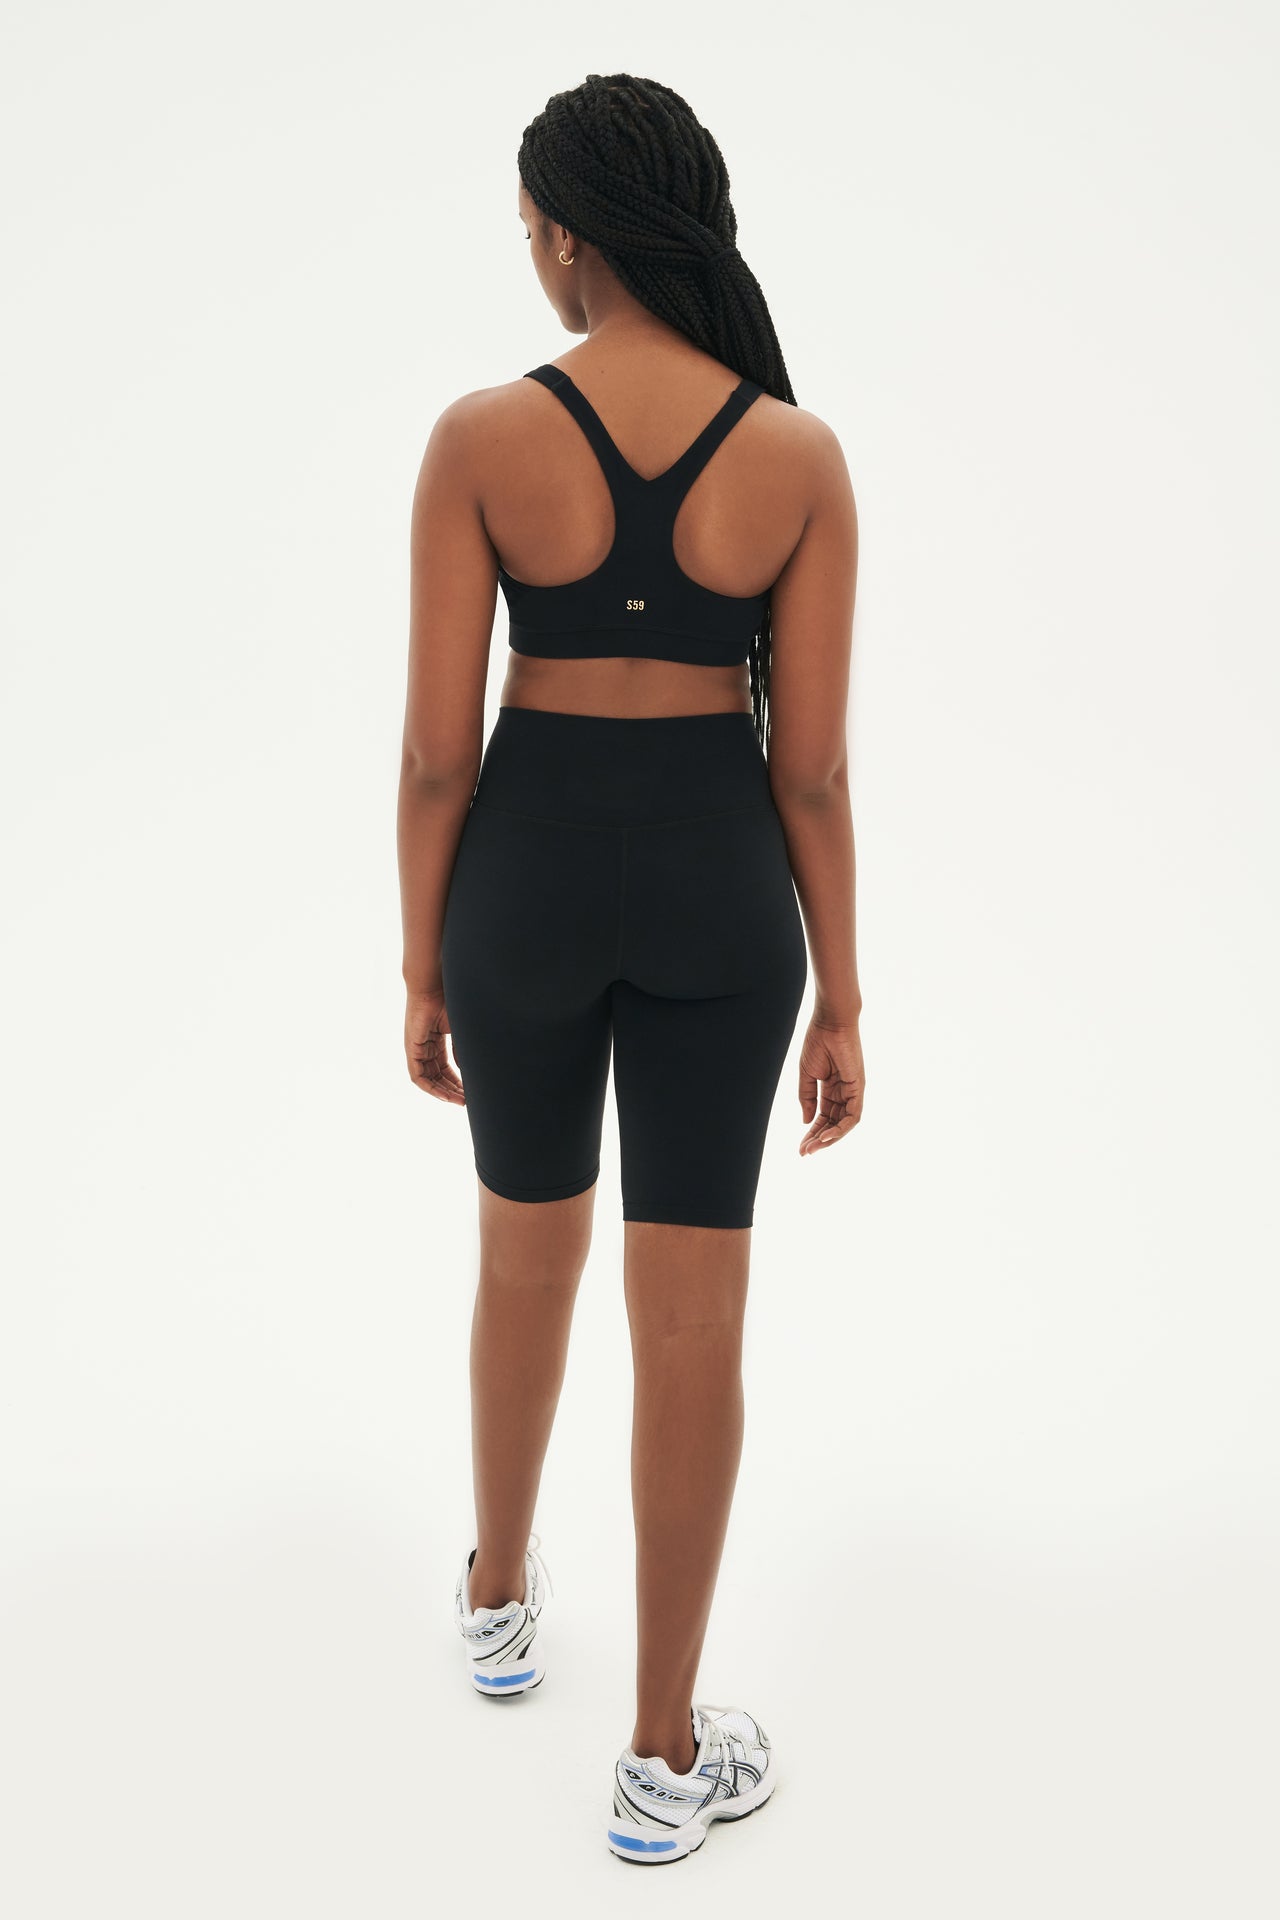 Full back view of girl wearing black sports bra and black high waisted bike shorts that stop right above the knee with white and grey shoes